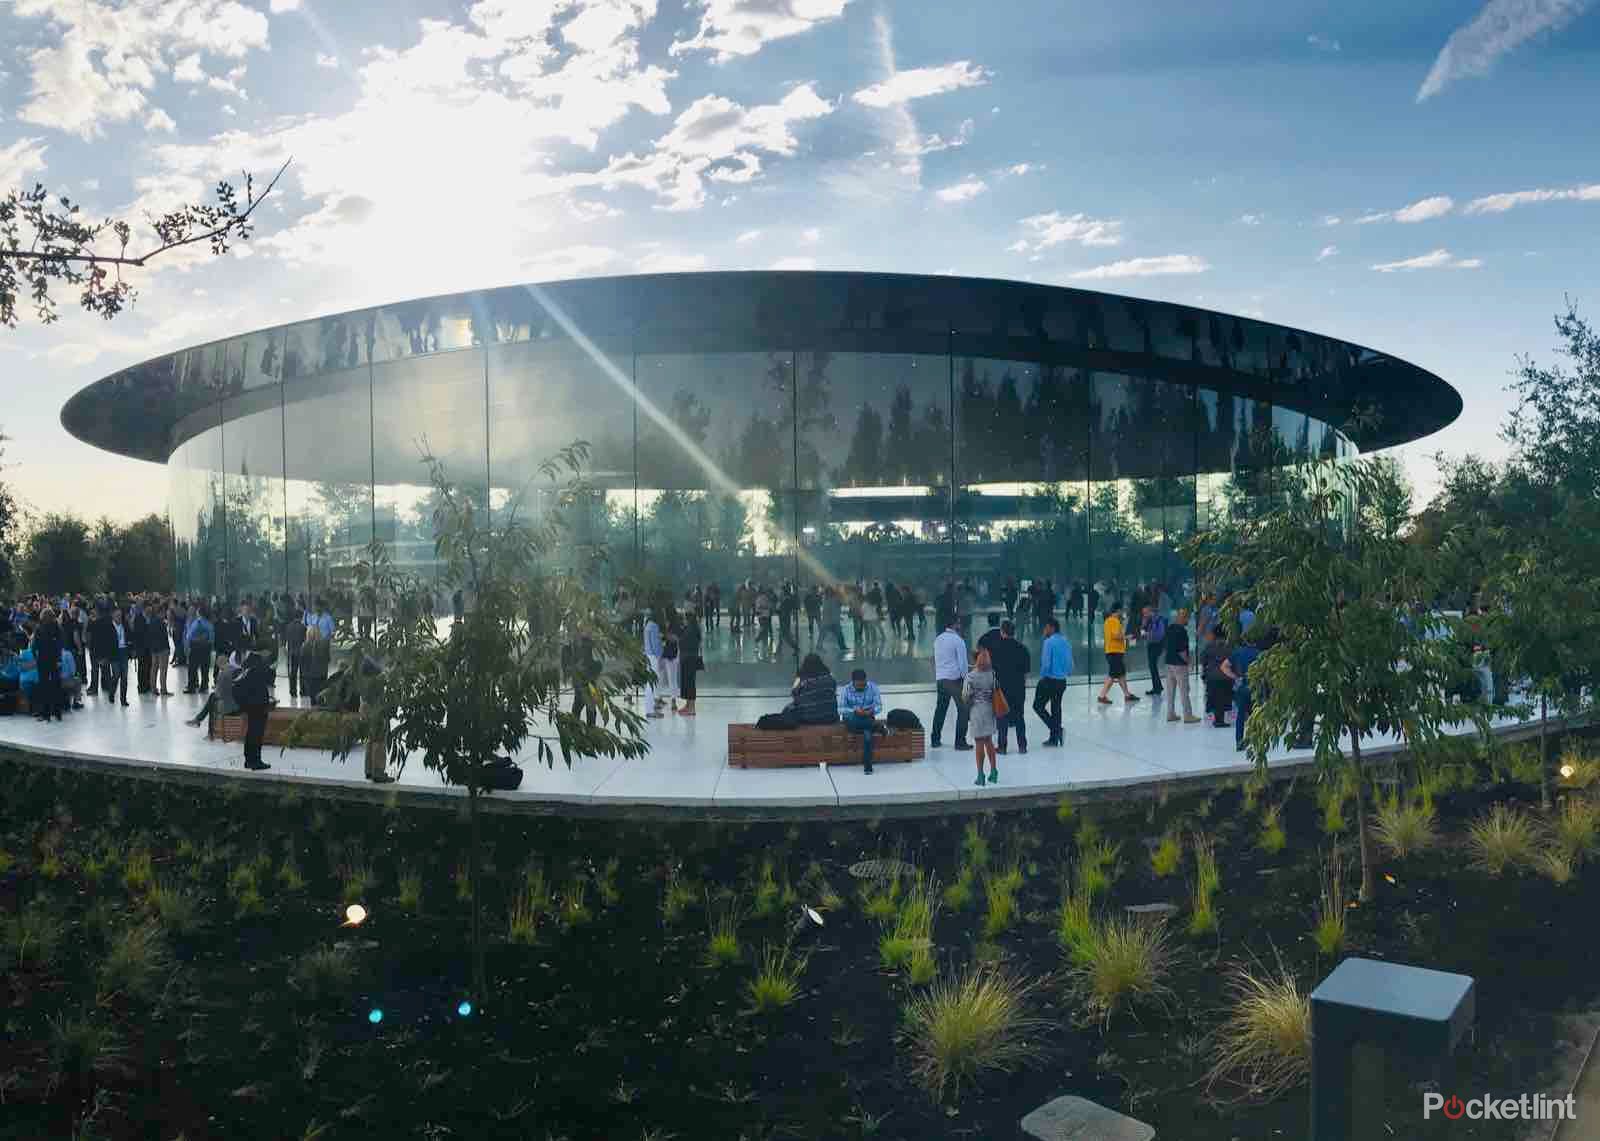 Apples Steve Jobs Theatre in pictures image 1